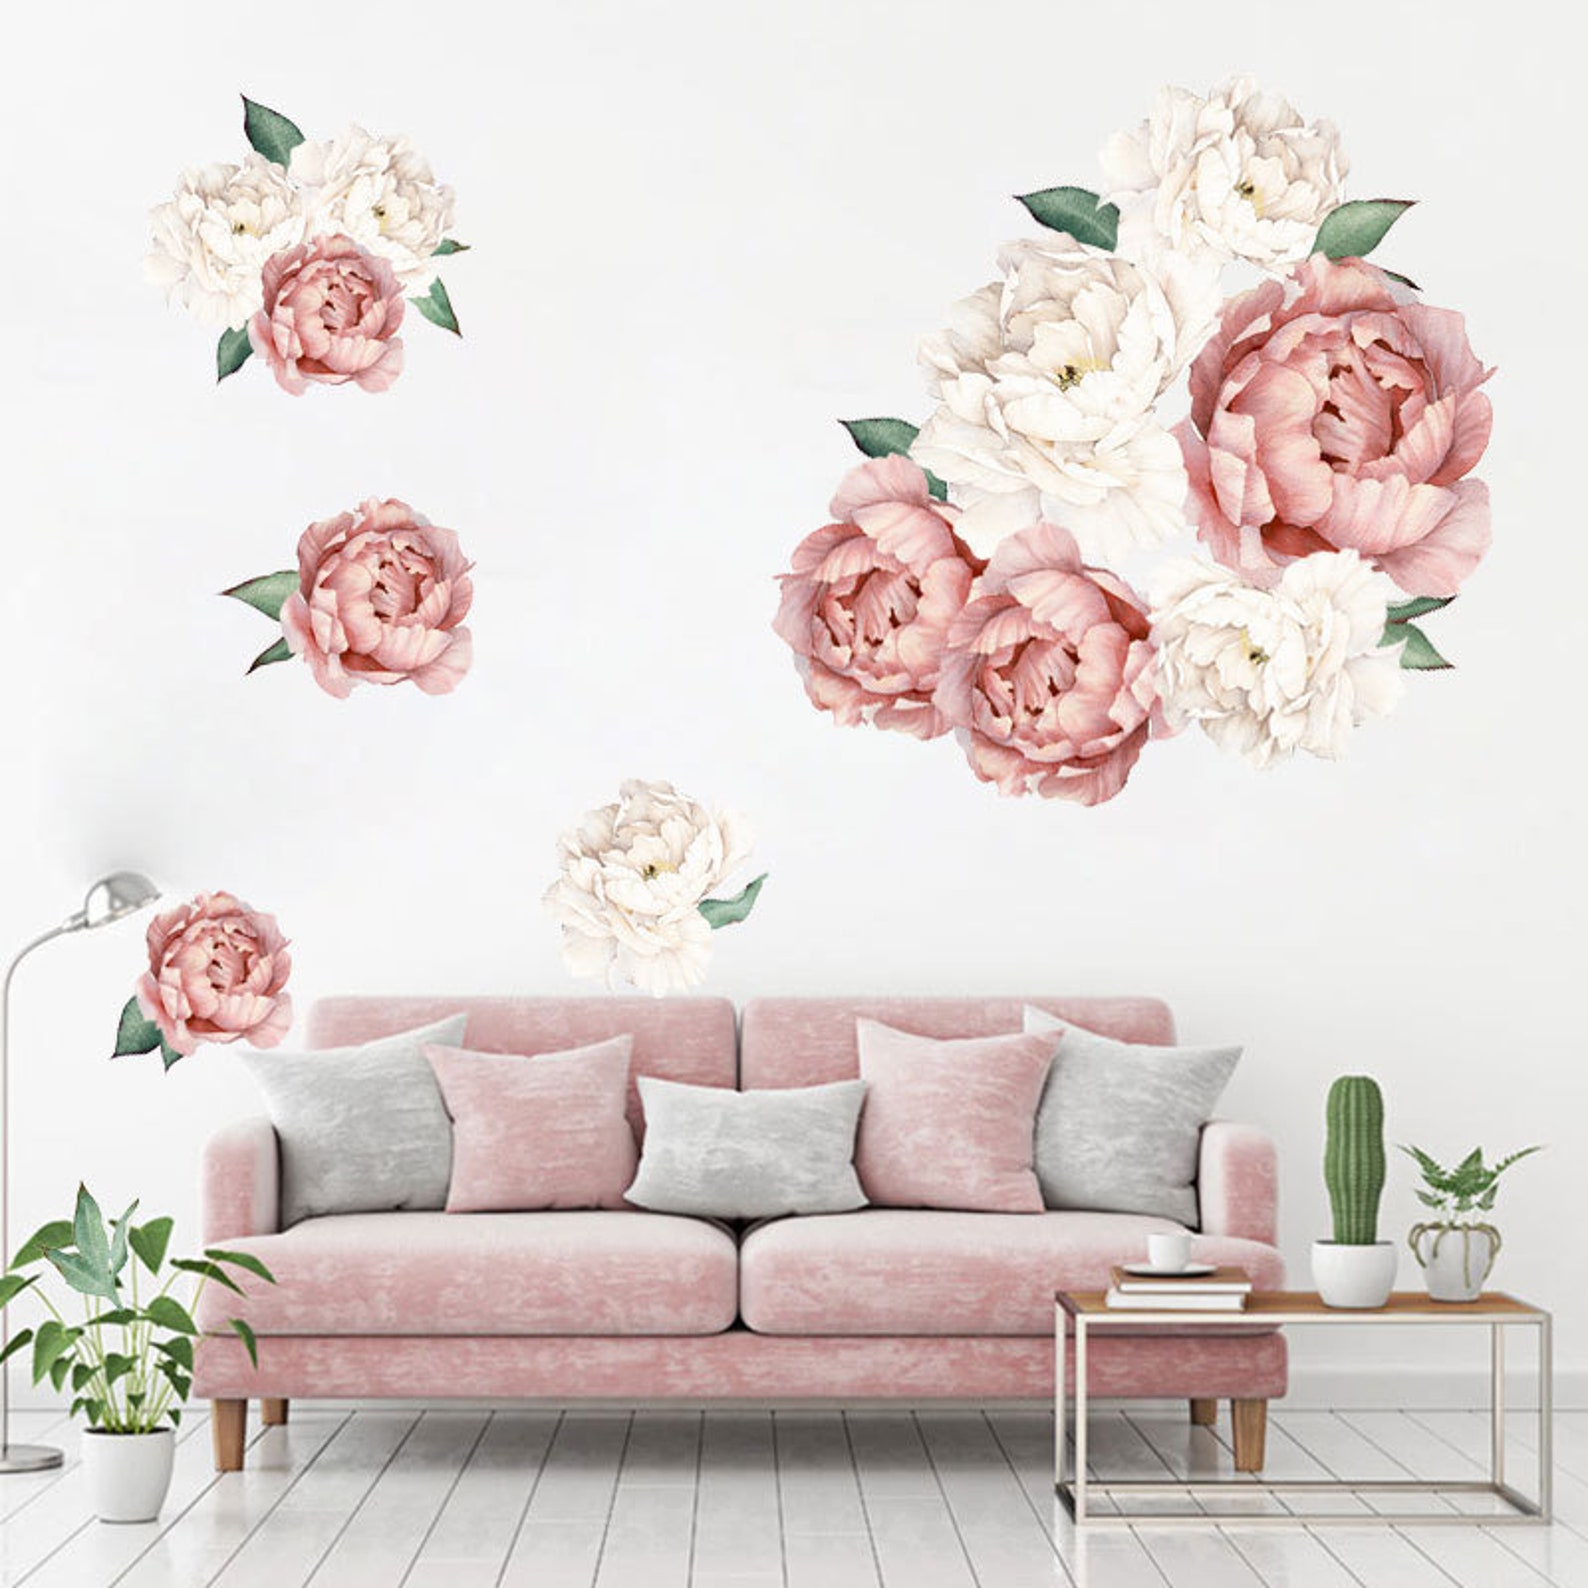 Roses Peony Floral Wall Decals Blush Pink / Peach and White - Etsy